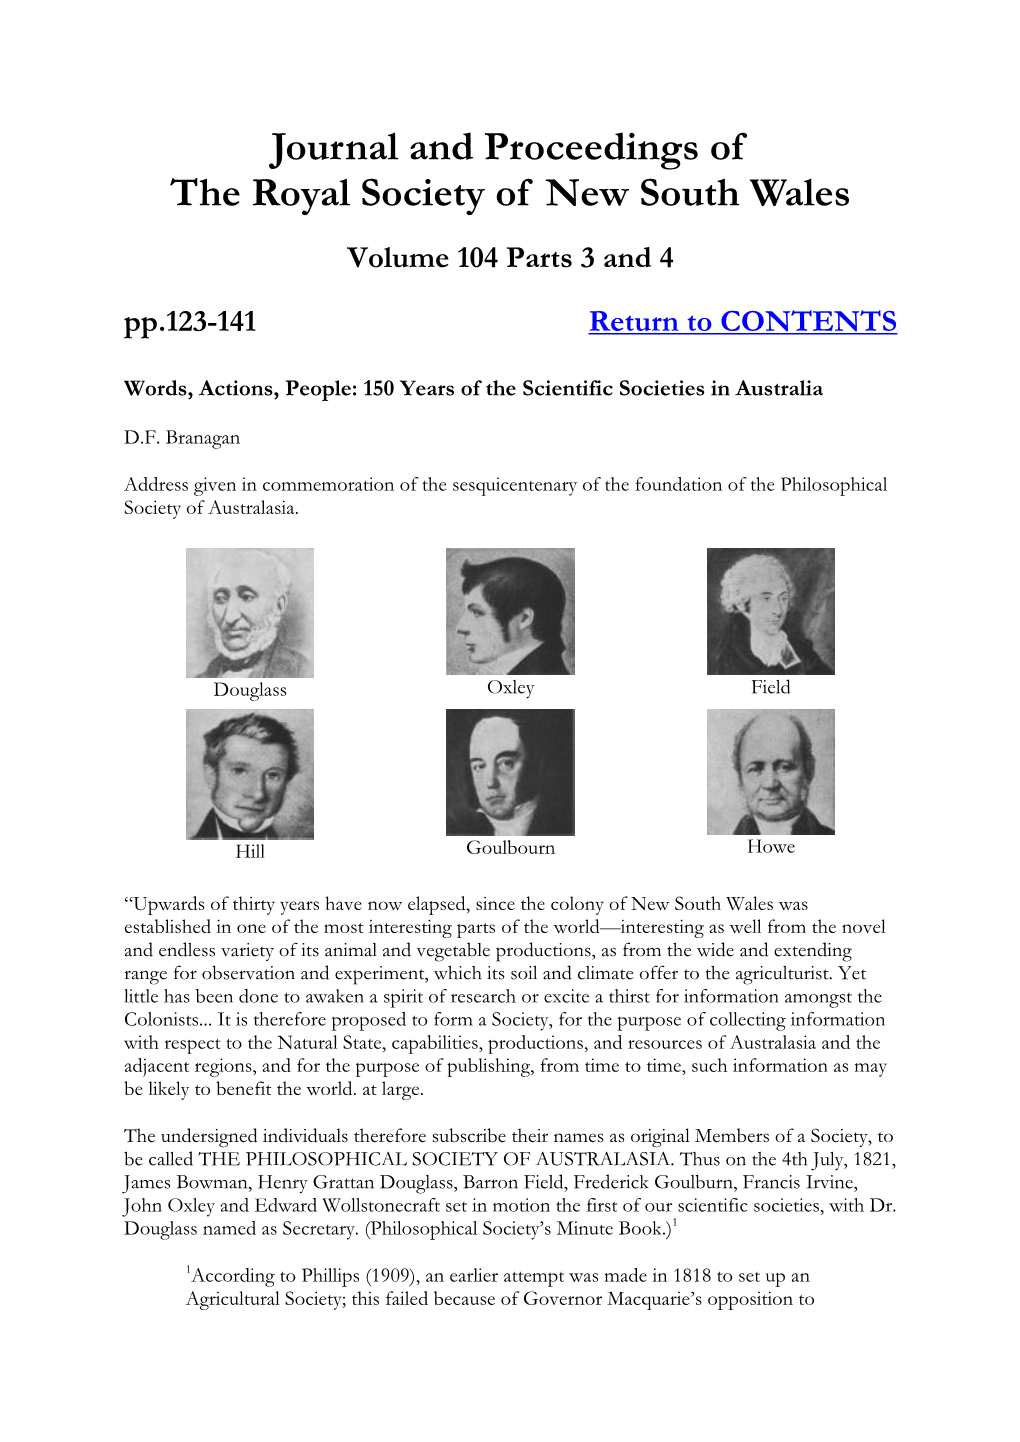 Journal and Proceedings of the Royal Society of New South Wales Volume 104 Parts 3 and 4